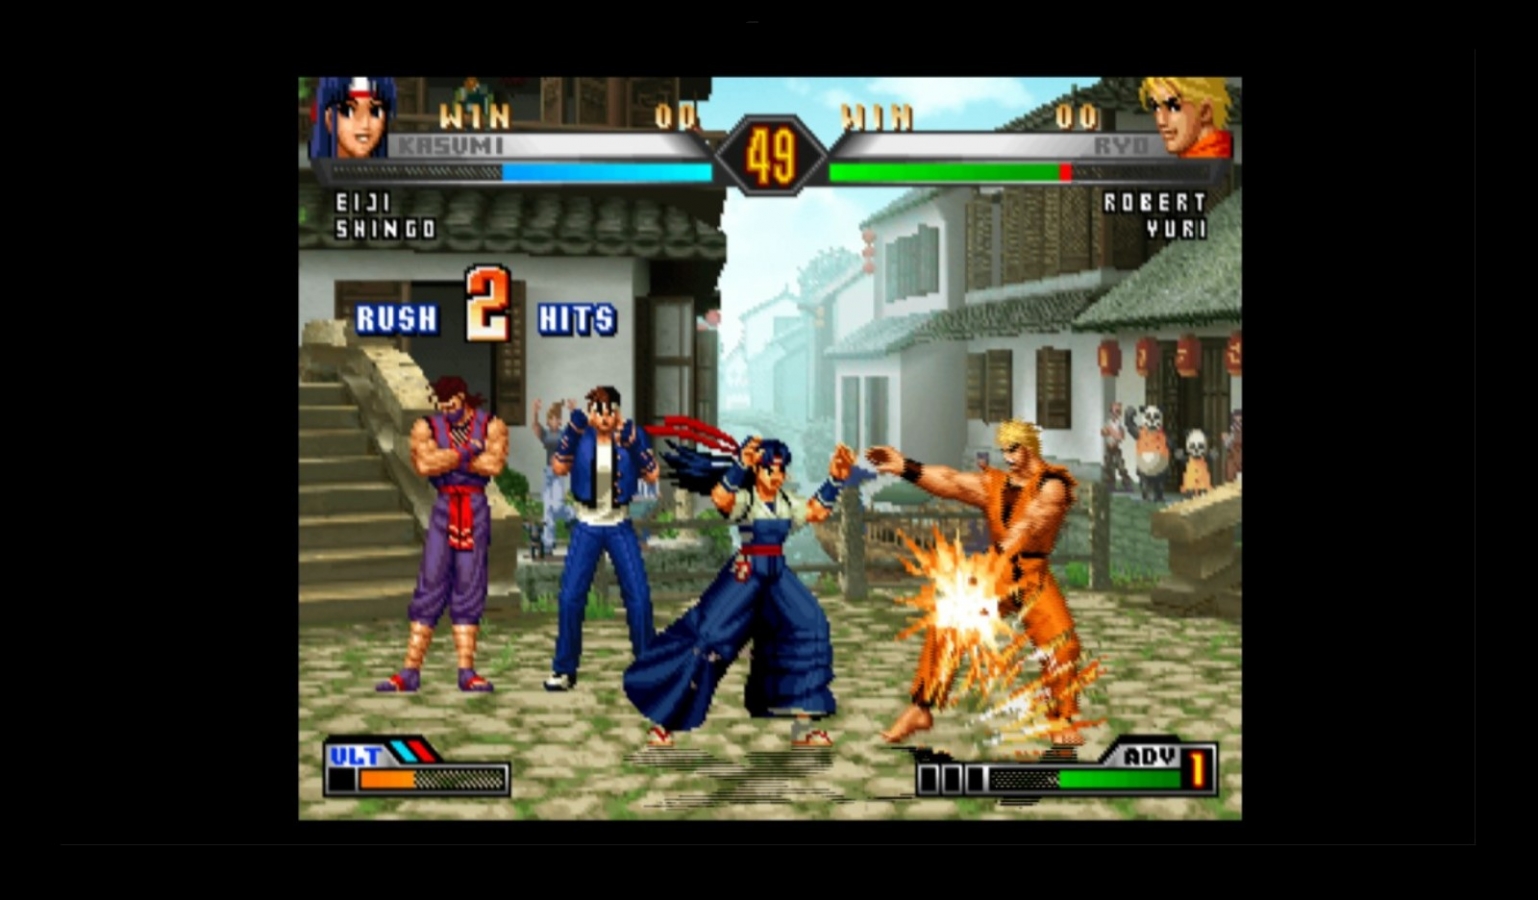 The King of Fighters 98 Ultimate Match Final Edition PS4 - Cadê